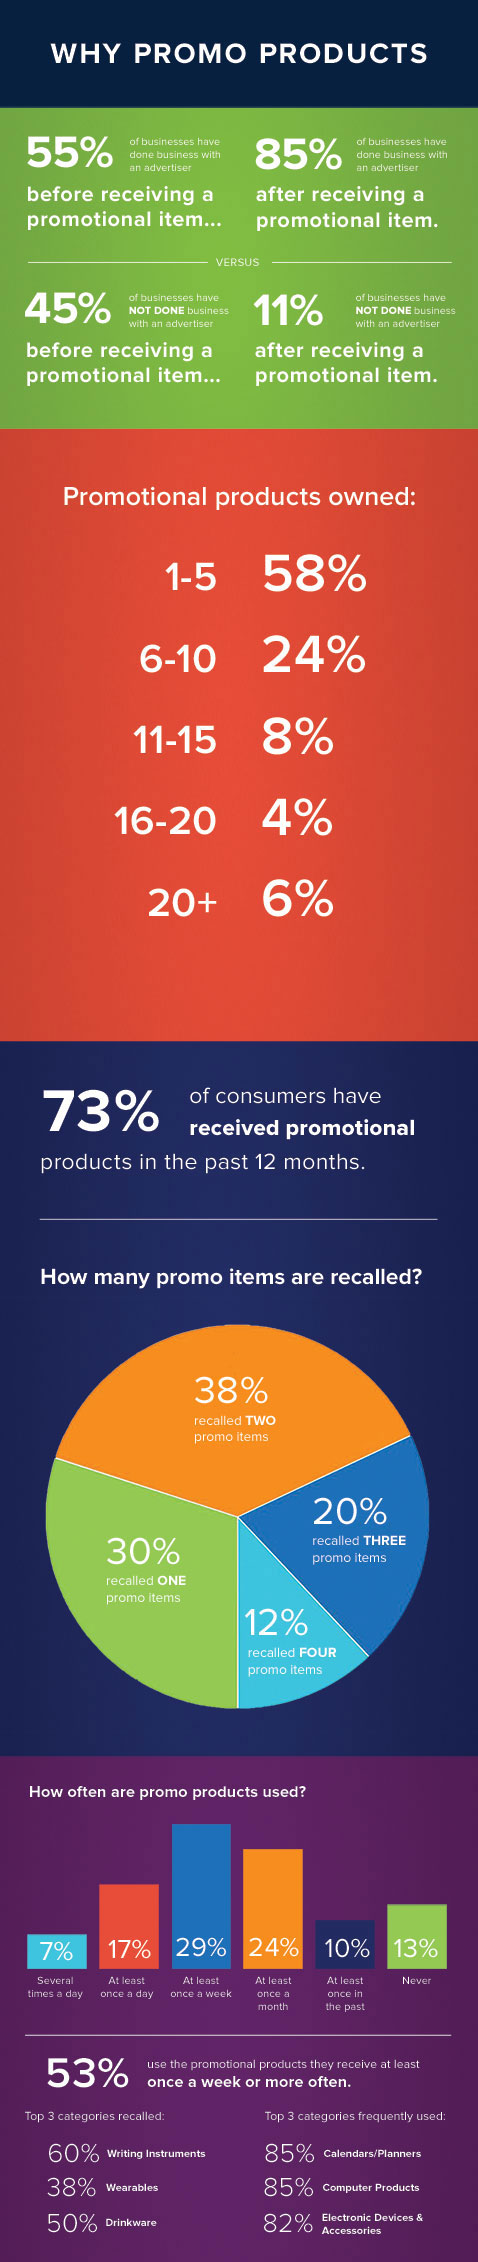 Why Promo Products Infographic